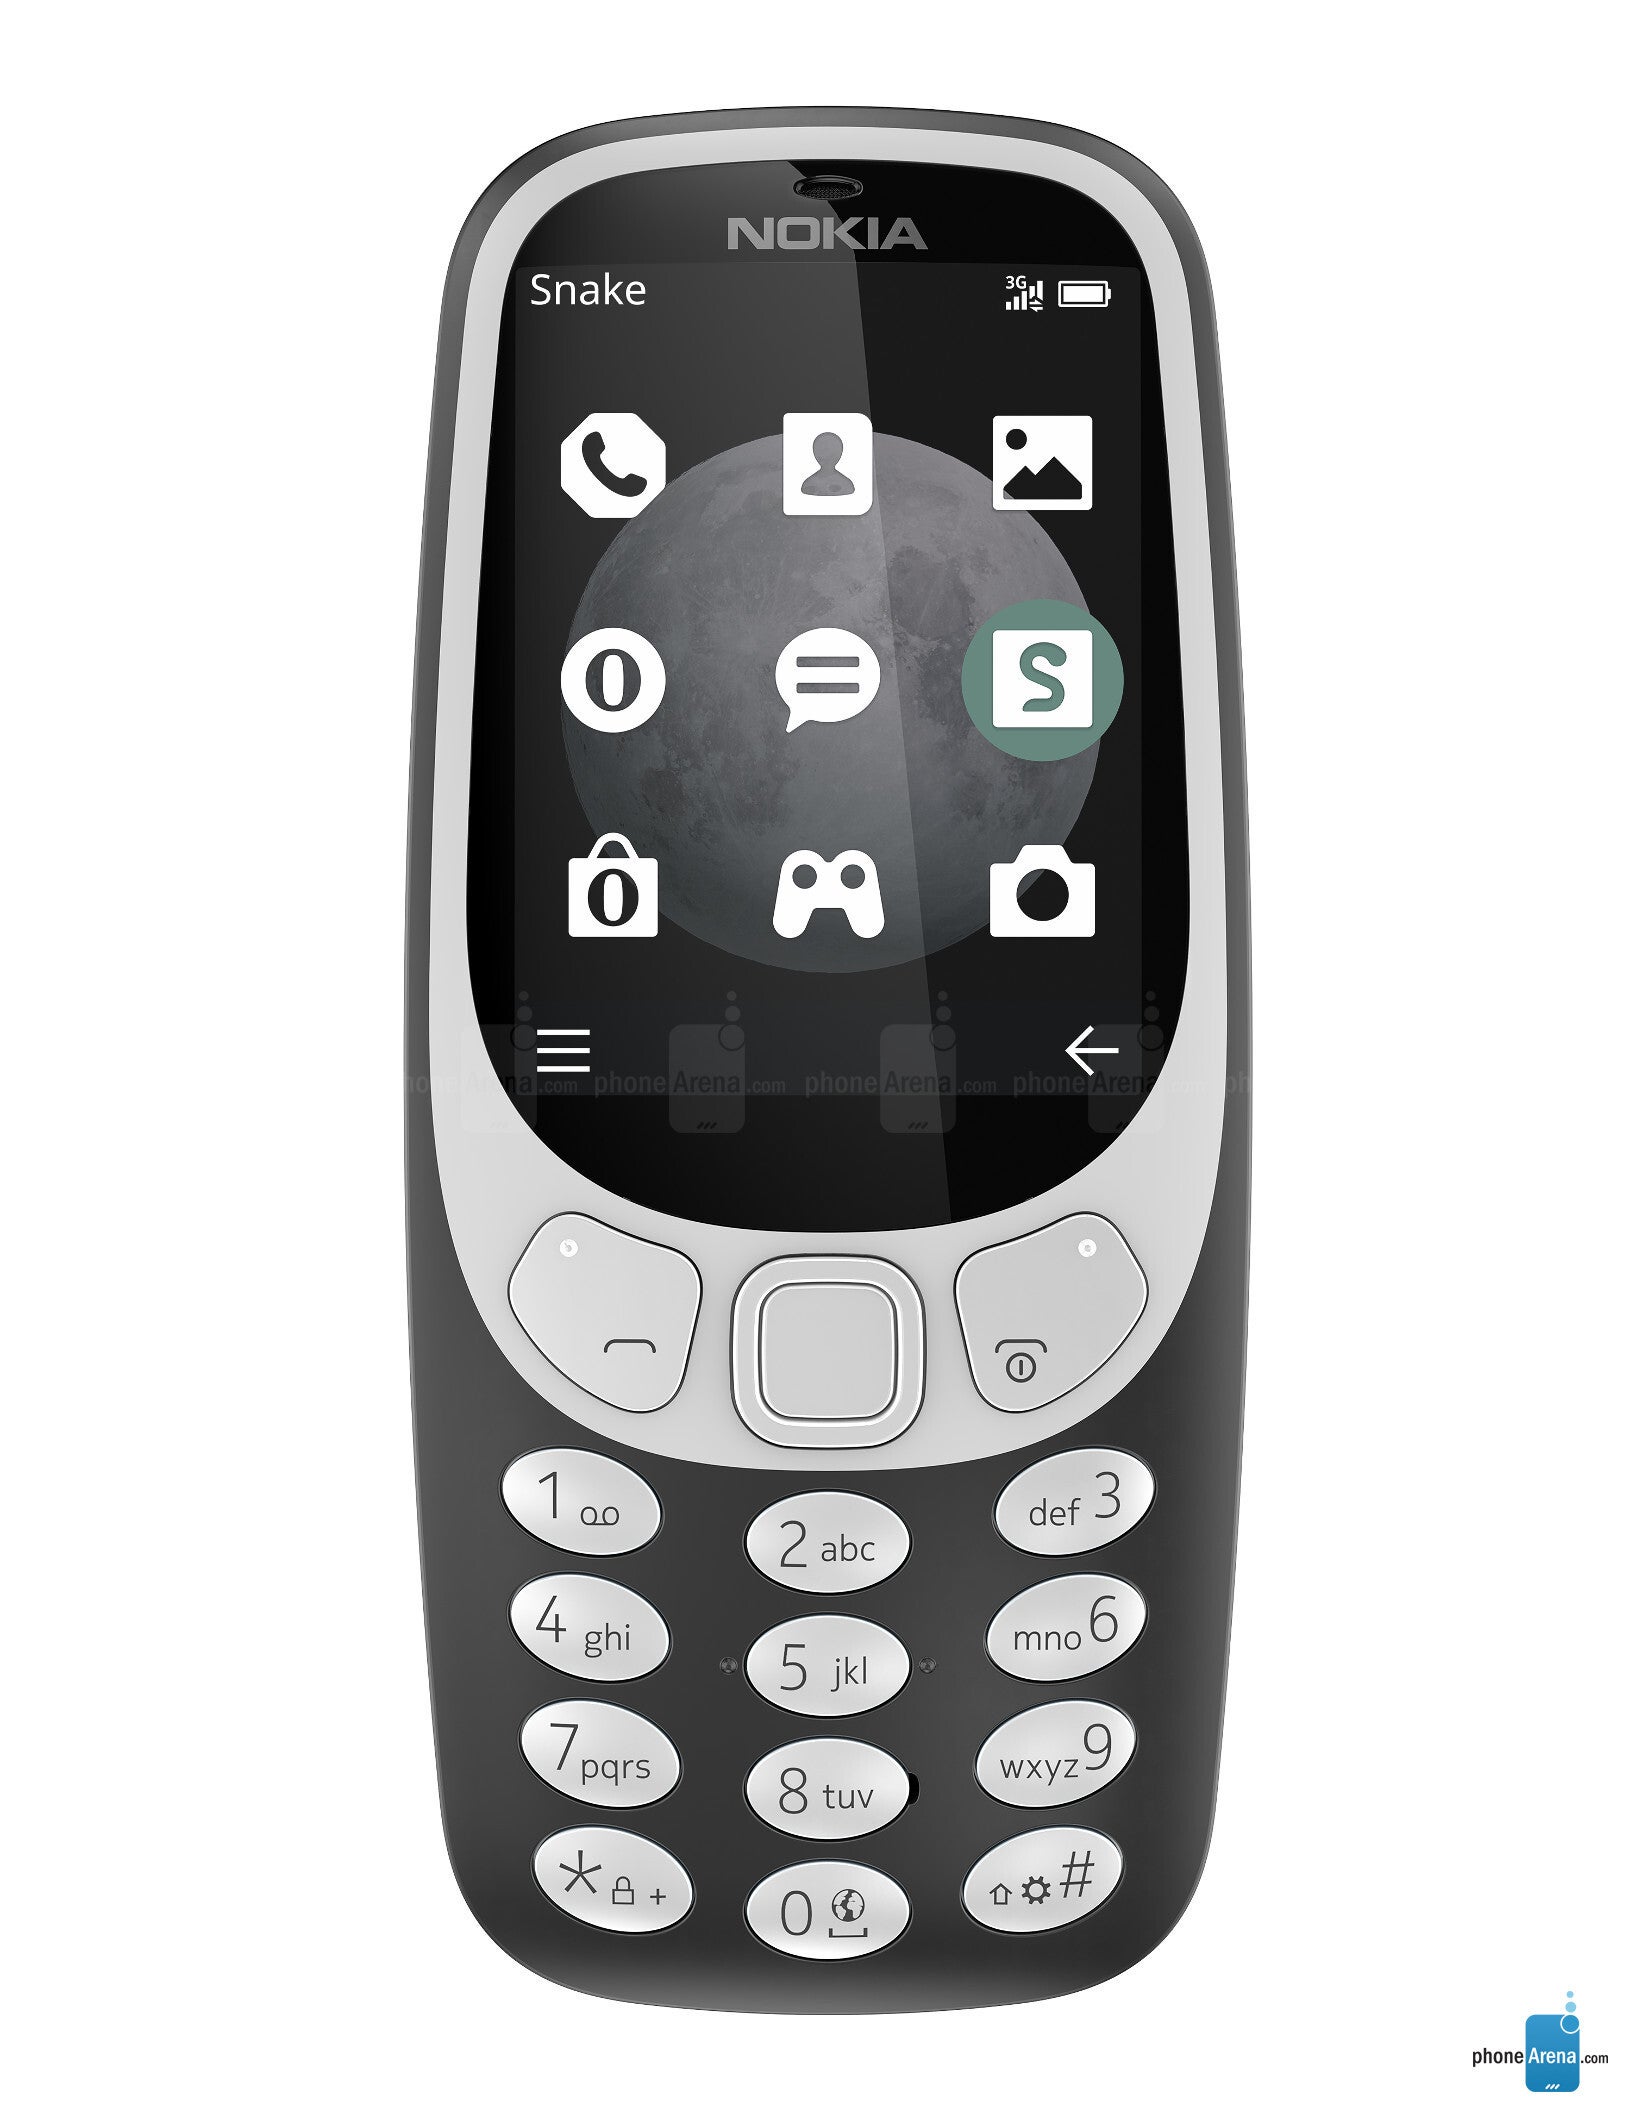 The Nokia 3310 uses T9 for typing - Nokia feature phone seen on video running Google Assistant and Android 8.1